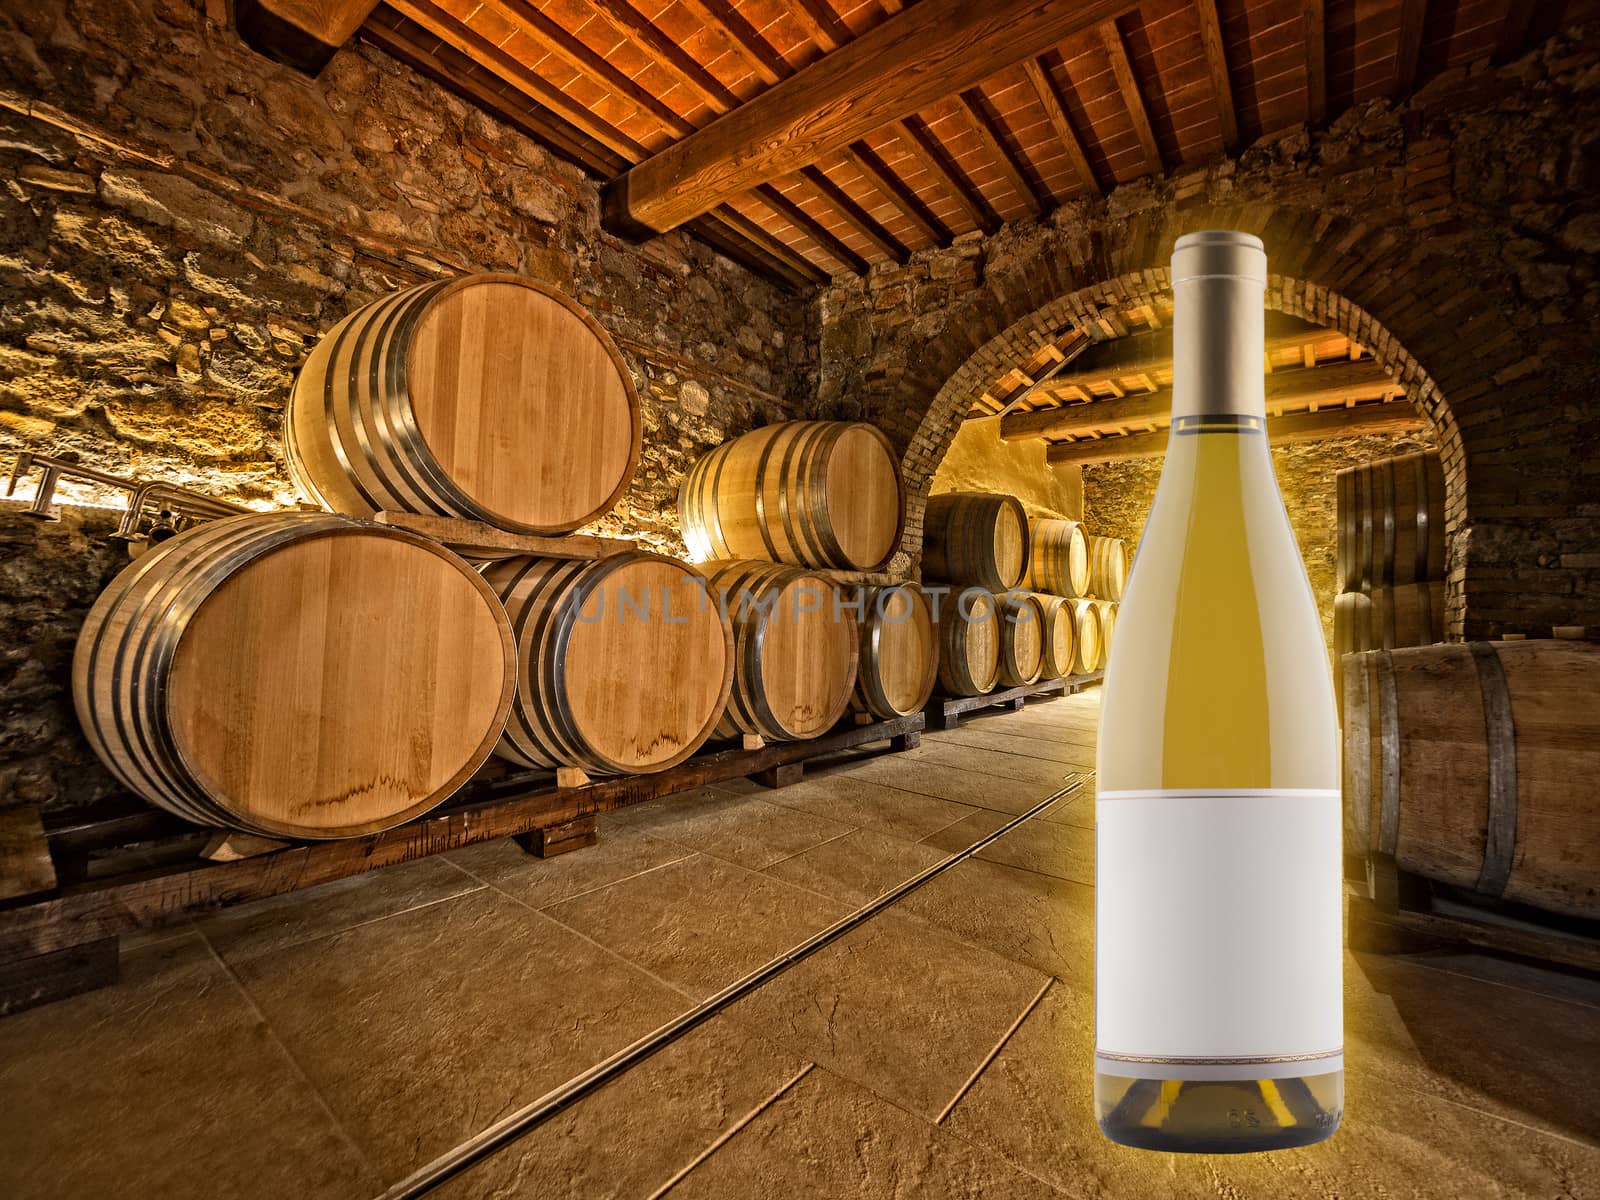 white wine bottle and oak barrels stacked in a winery cellar